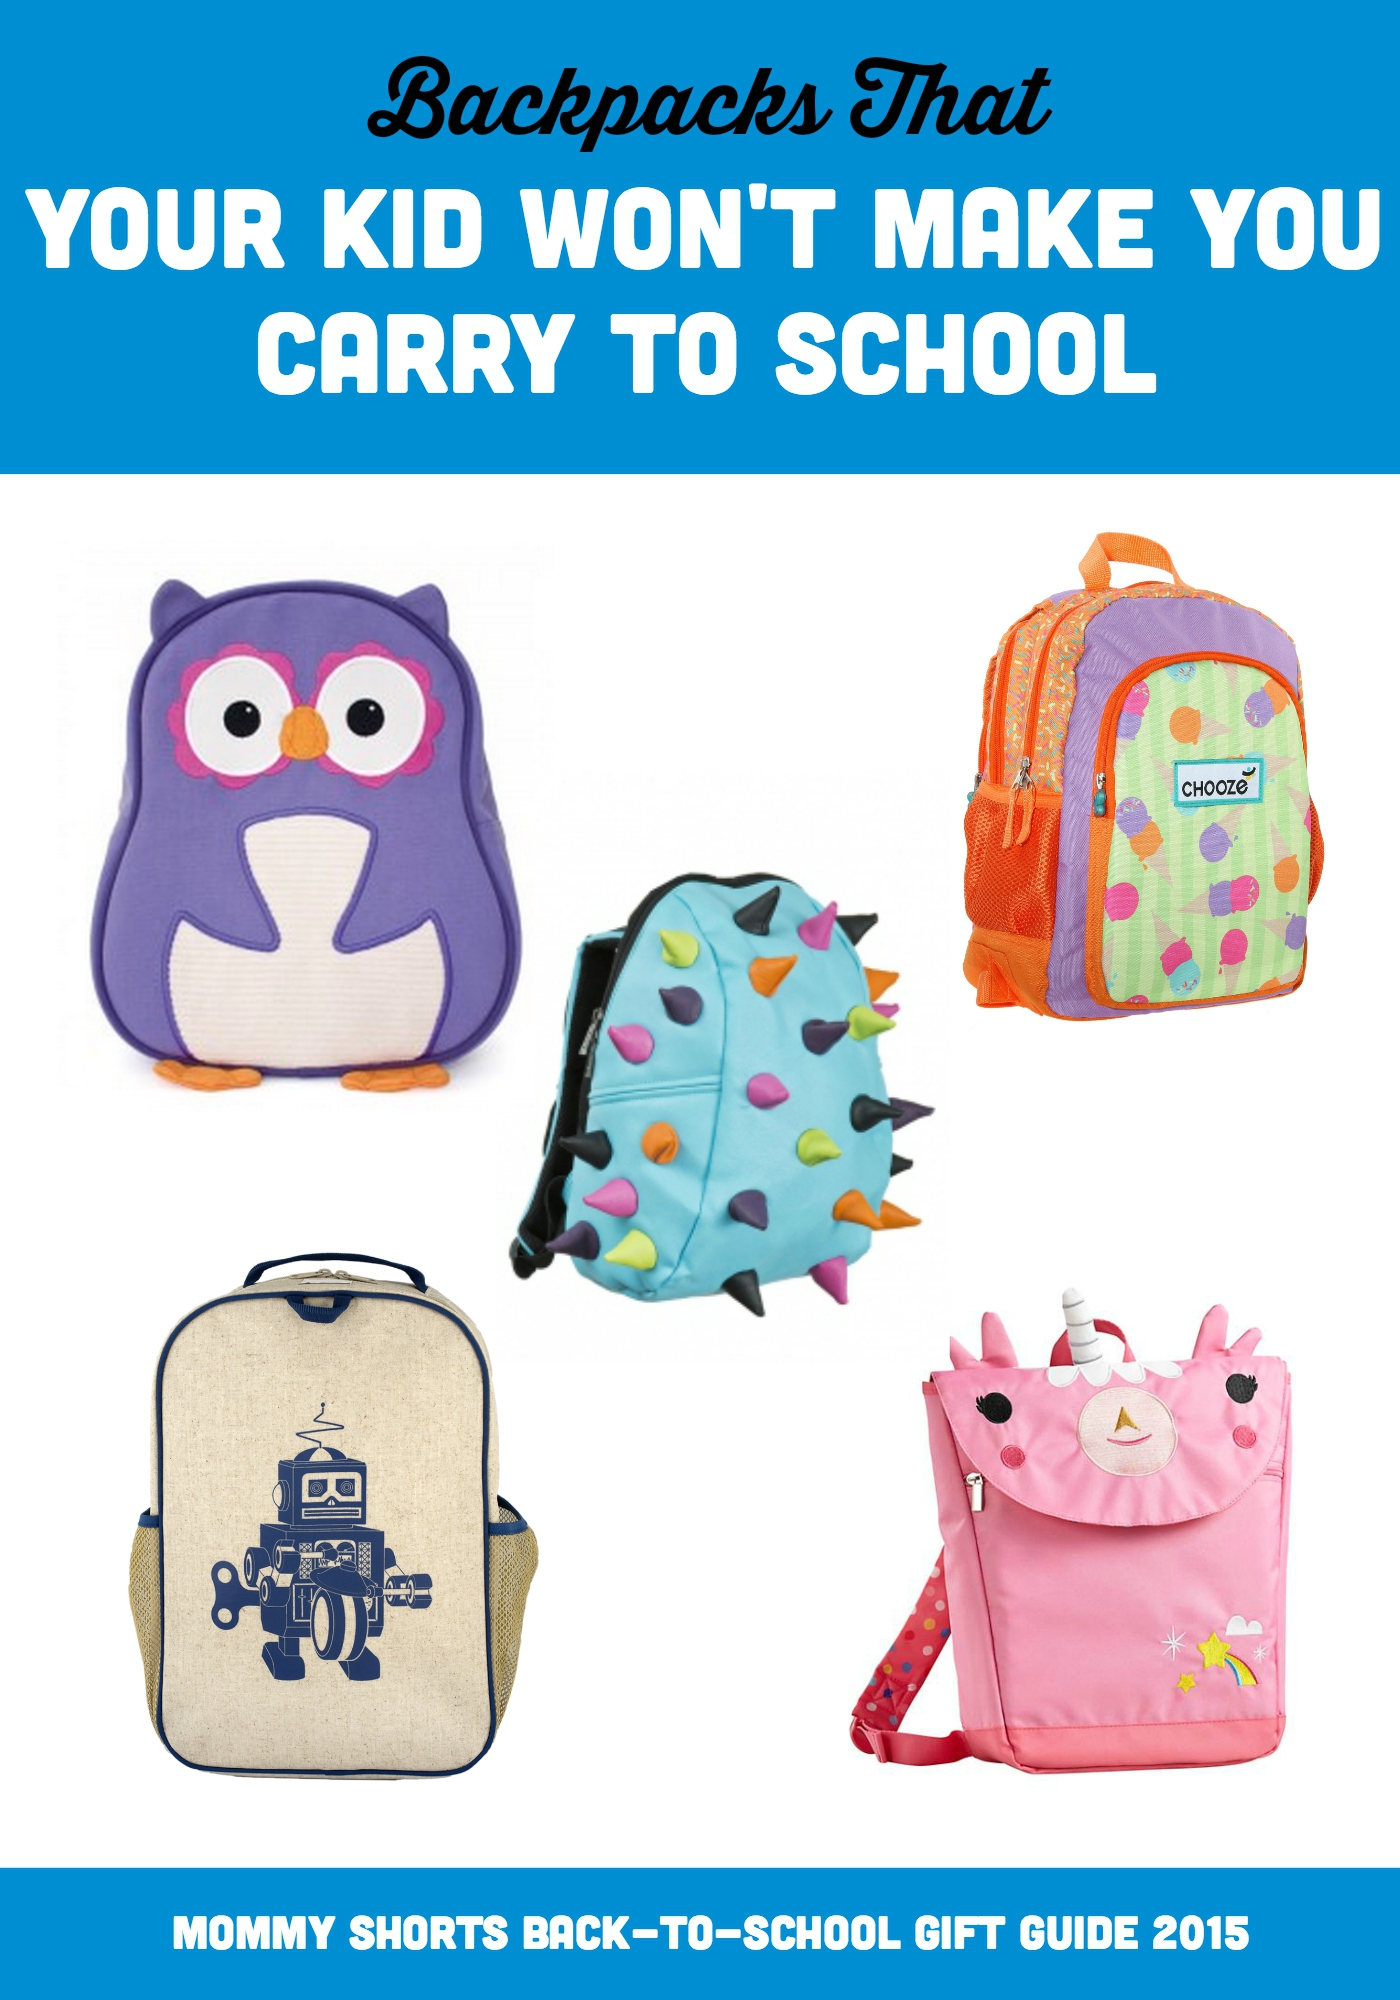 Backpacks That Your Kid Won't Make You Carry To School